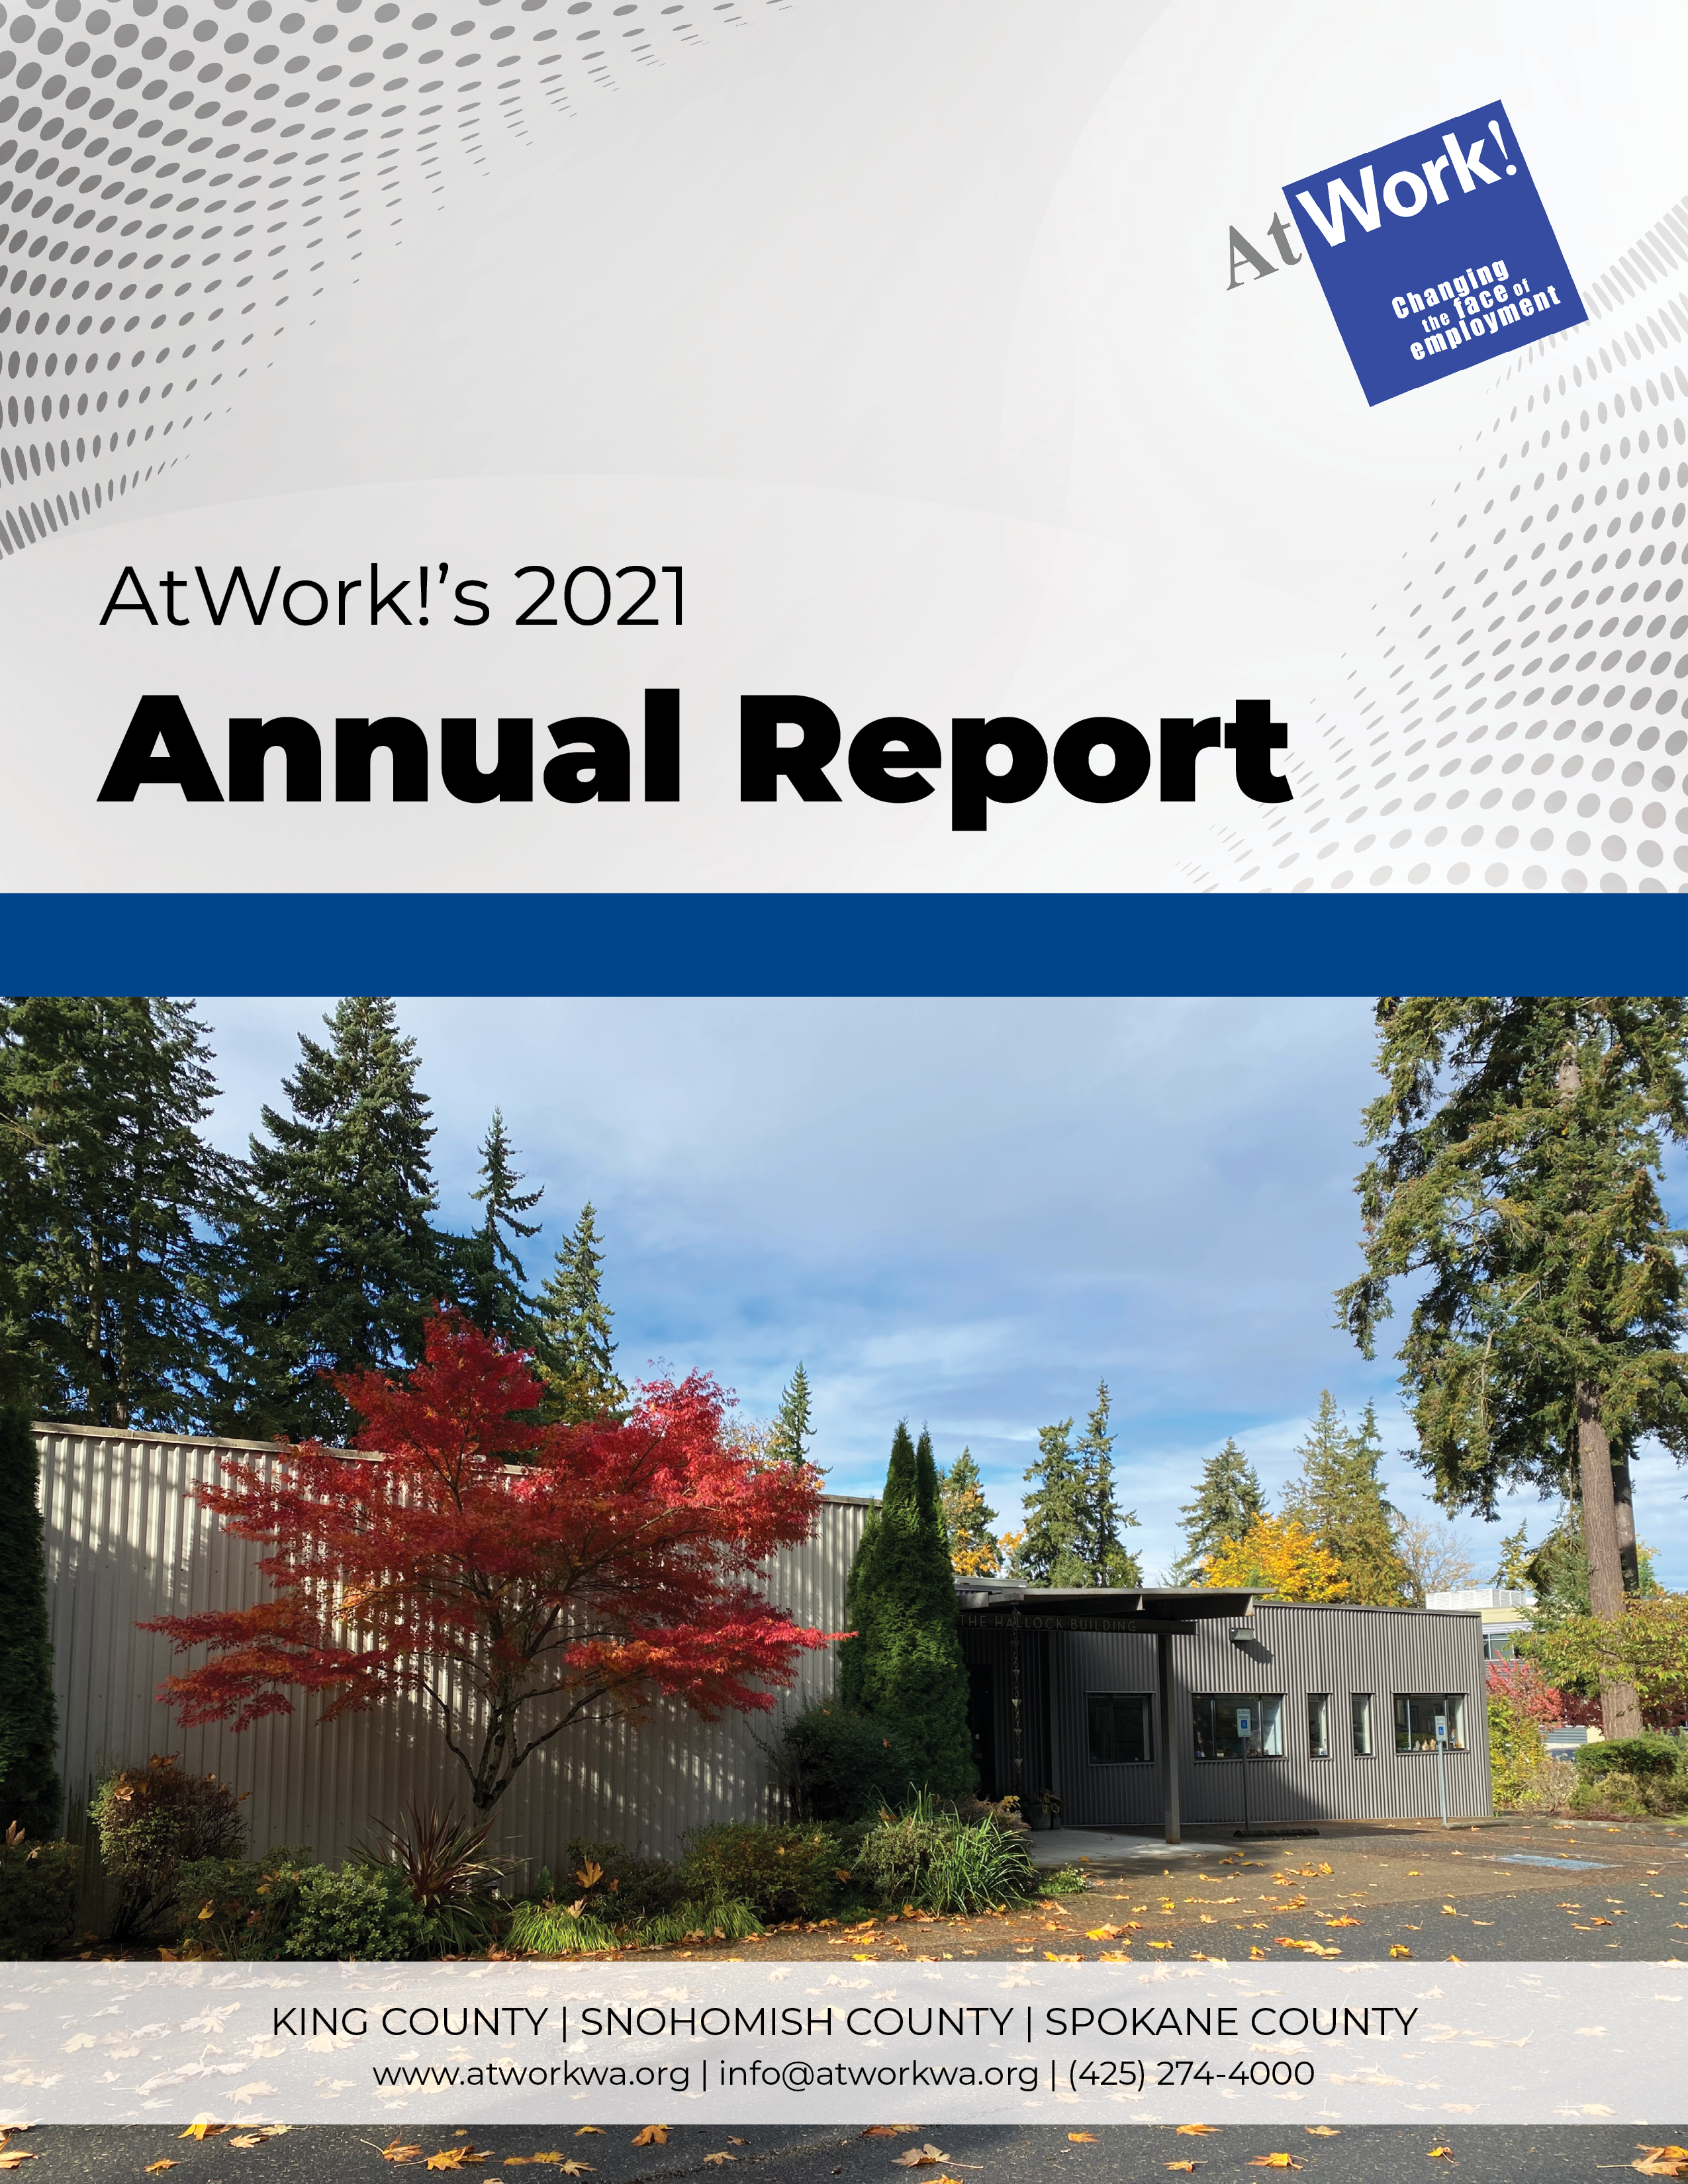 AtWork!'s 2021 Annual Report